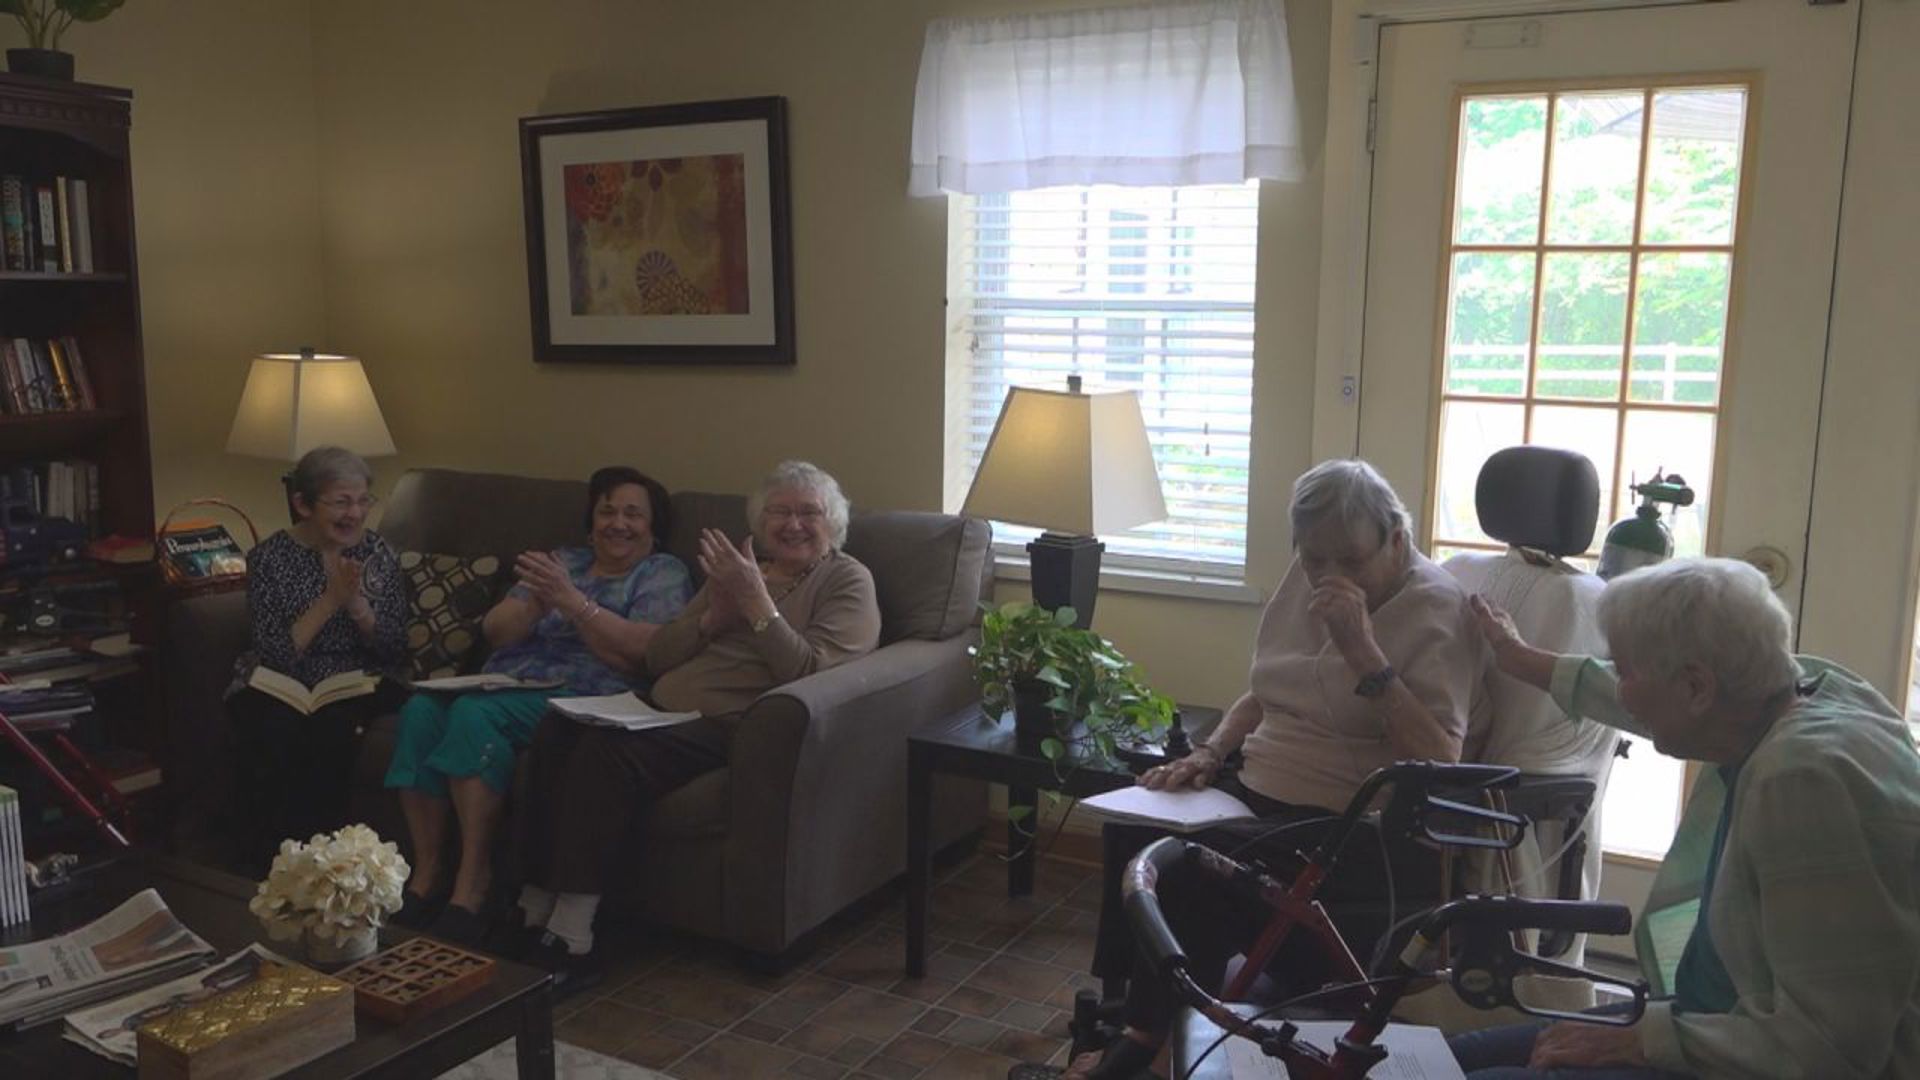 A friendship has made a senior living community in Hampden Township, Cumberland County a home.